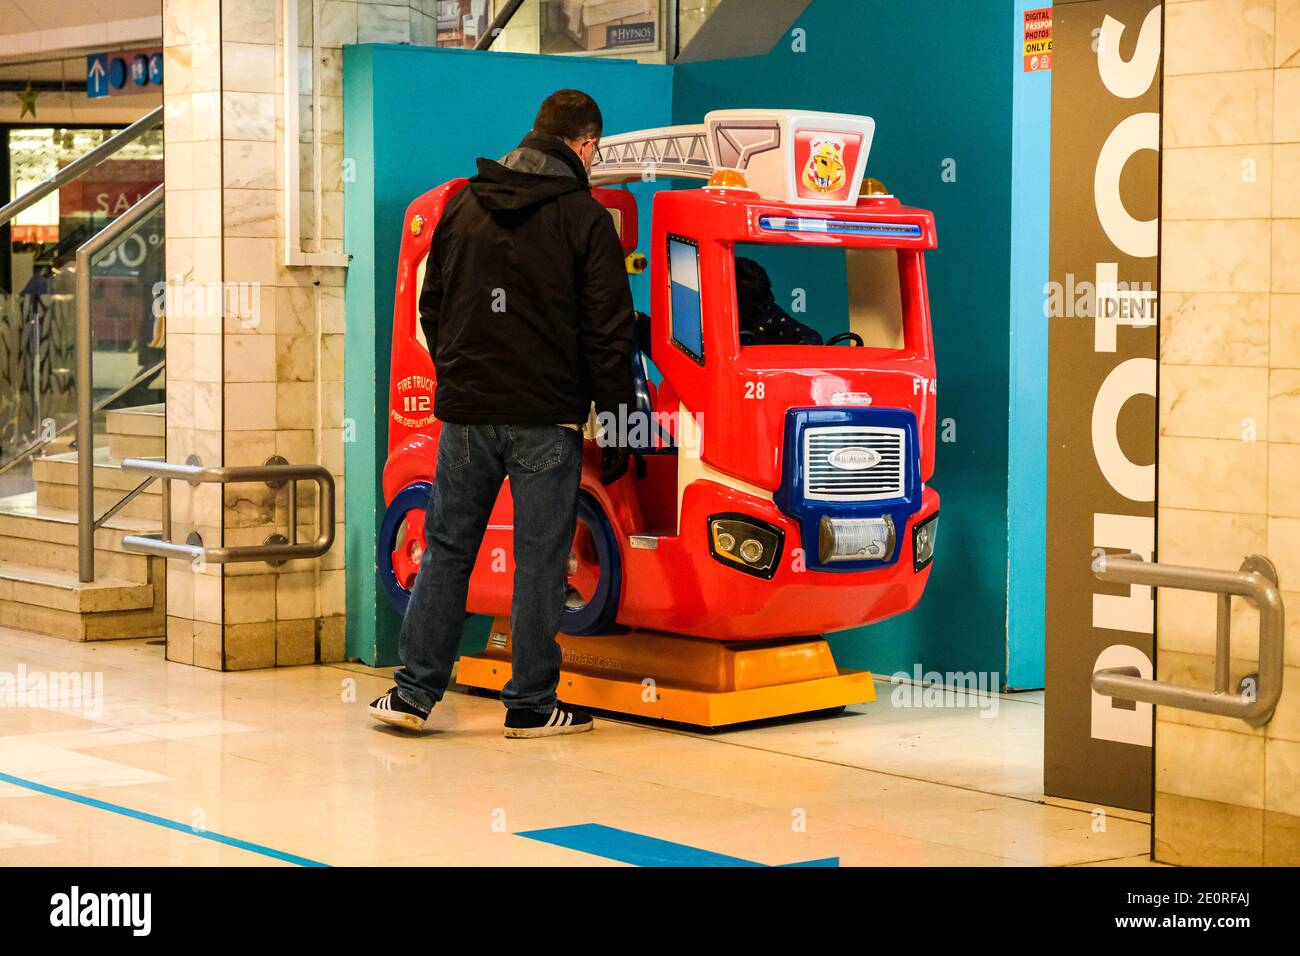 London UK, January 02 2021, Father Or Man Supervising His Child On A Toy Fire Engine Fairground Style Ride Stock Photo